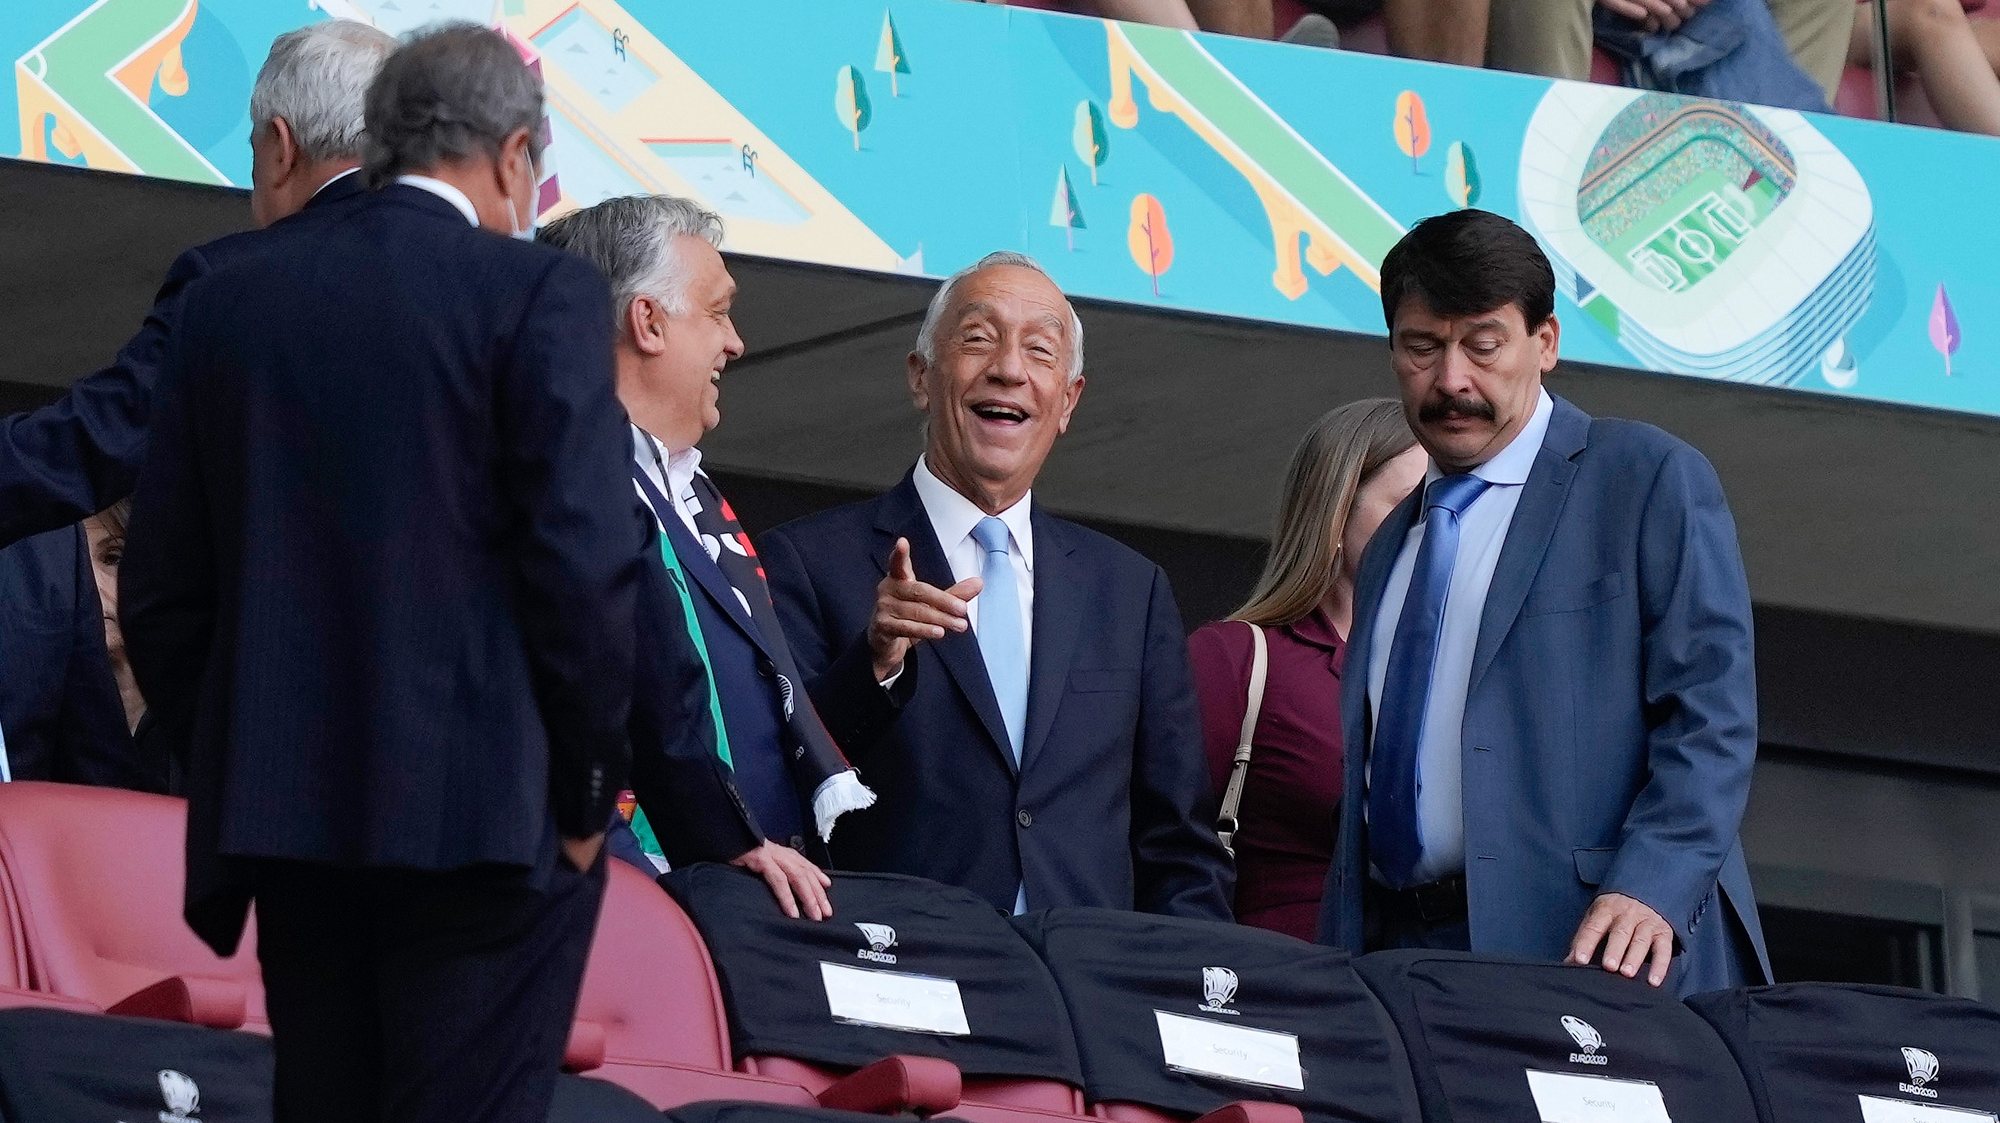 Marcelo Rebelo de Sousa President of Portugal during UEFA EURO 2020 group F preliminary round soccer match between Hungary and Portugal in Budapest, Hungary, 15 June 2021. HUGO DELGADO/LUSA